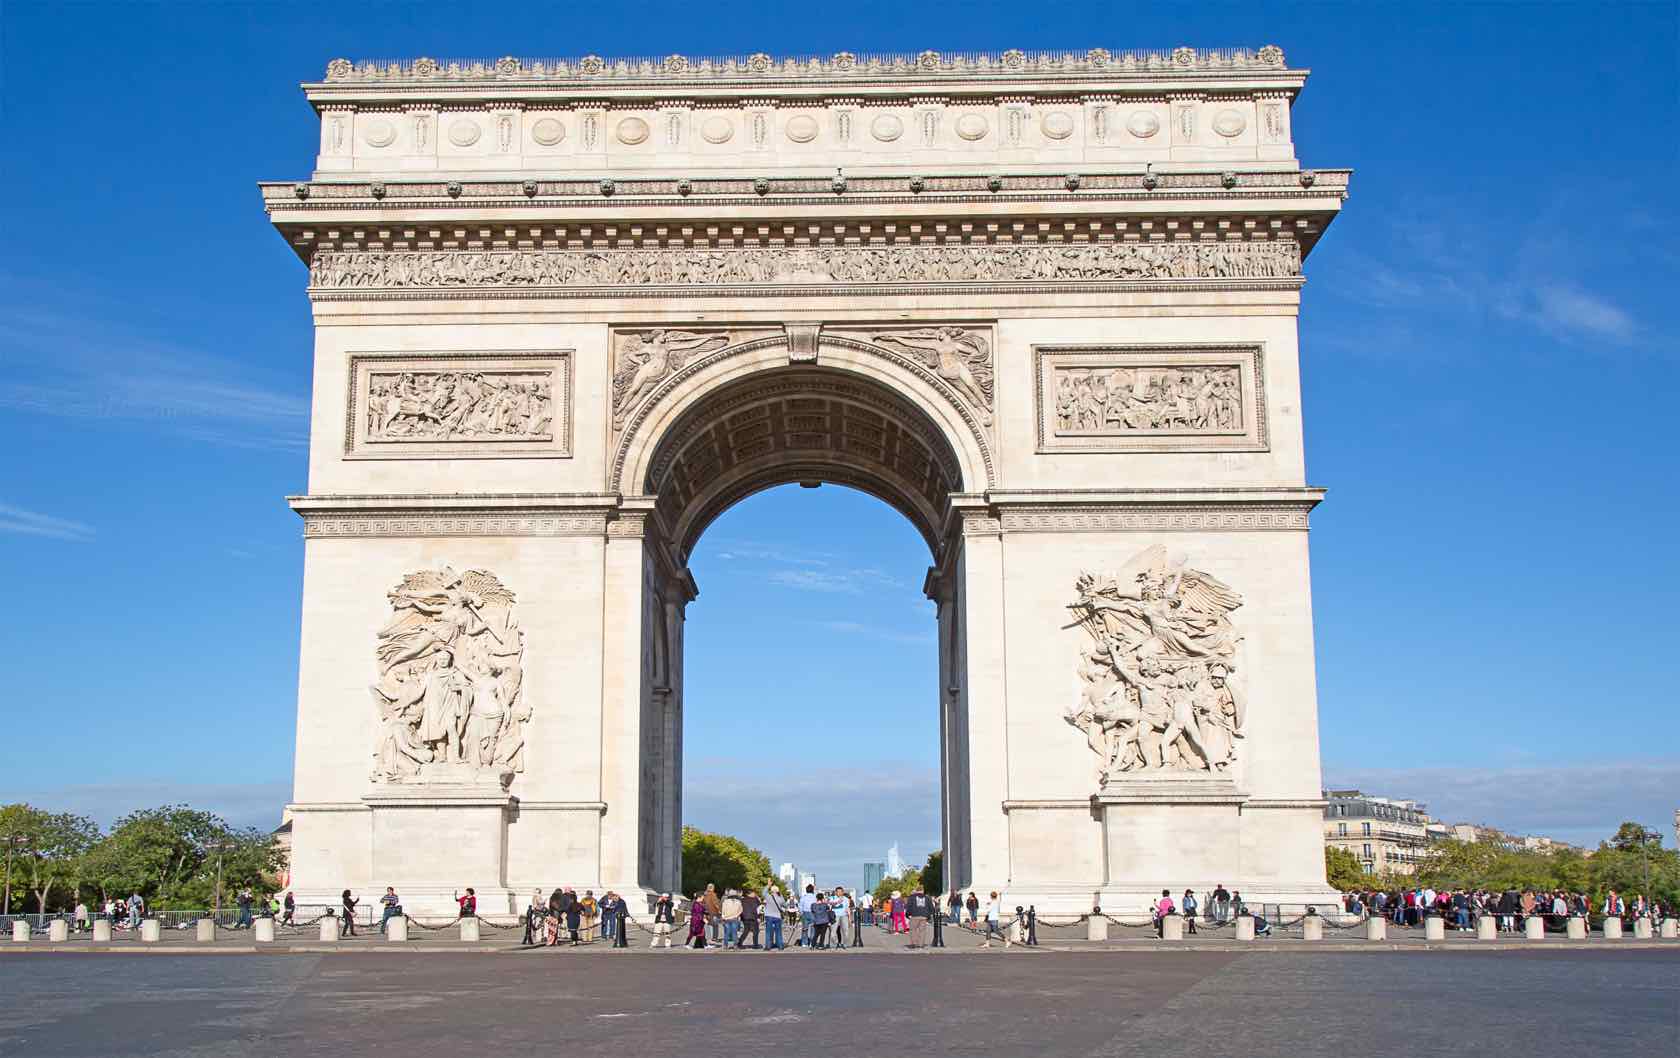 Visiting the Arc de Triomphe in Paris: What You Need to Know